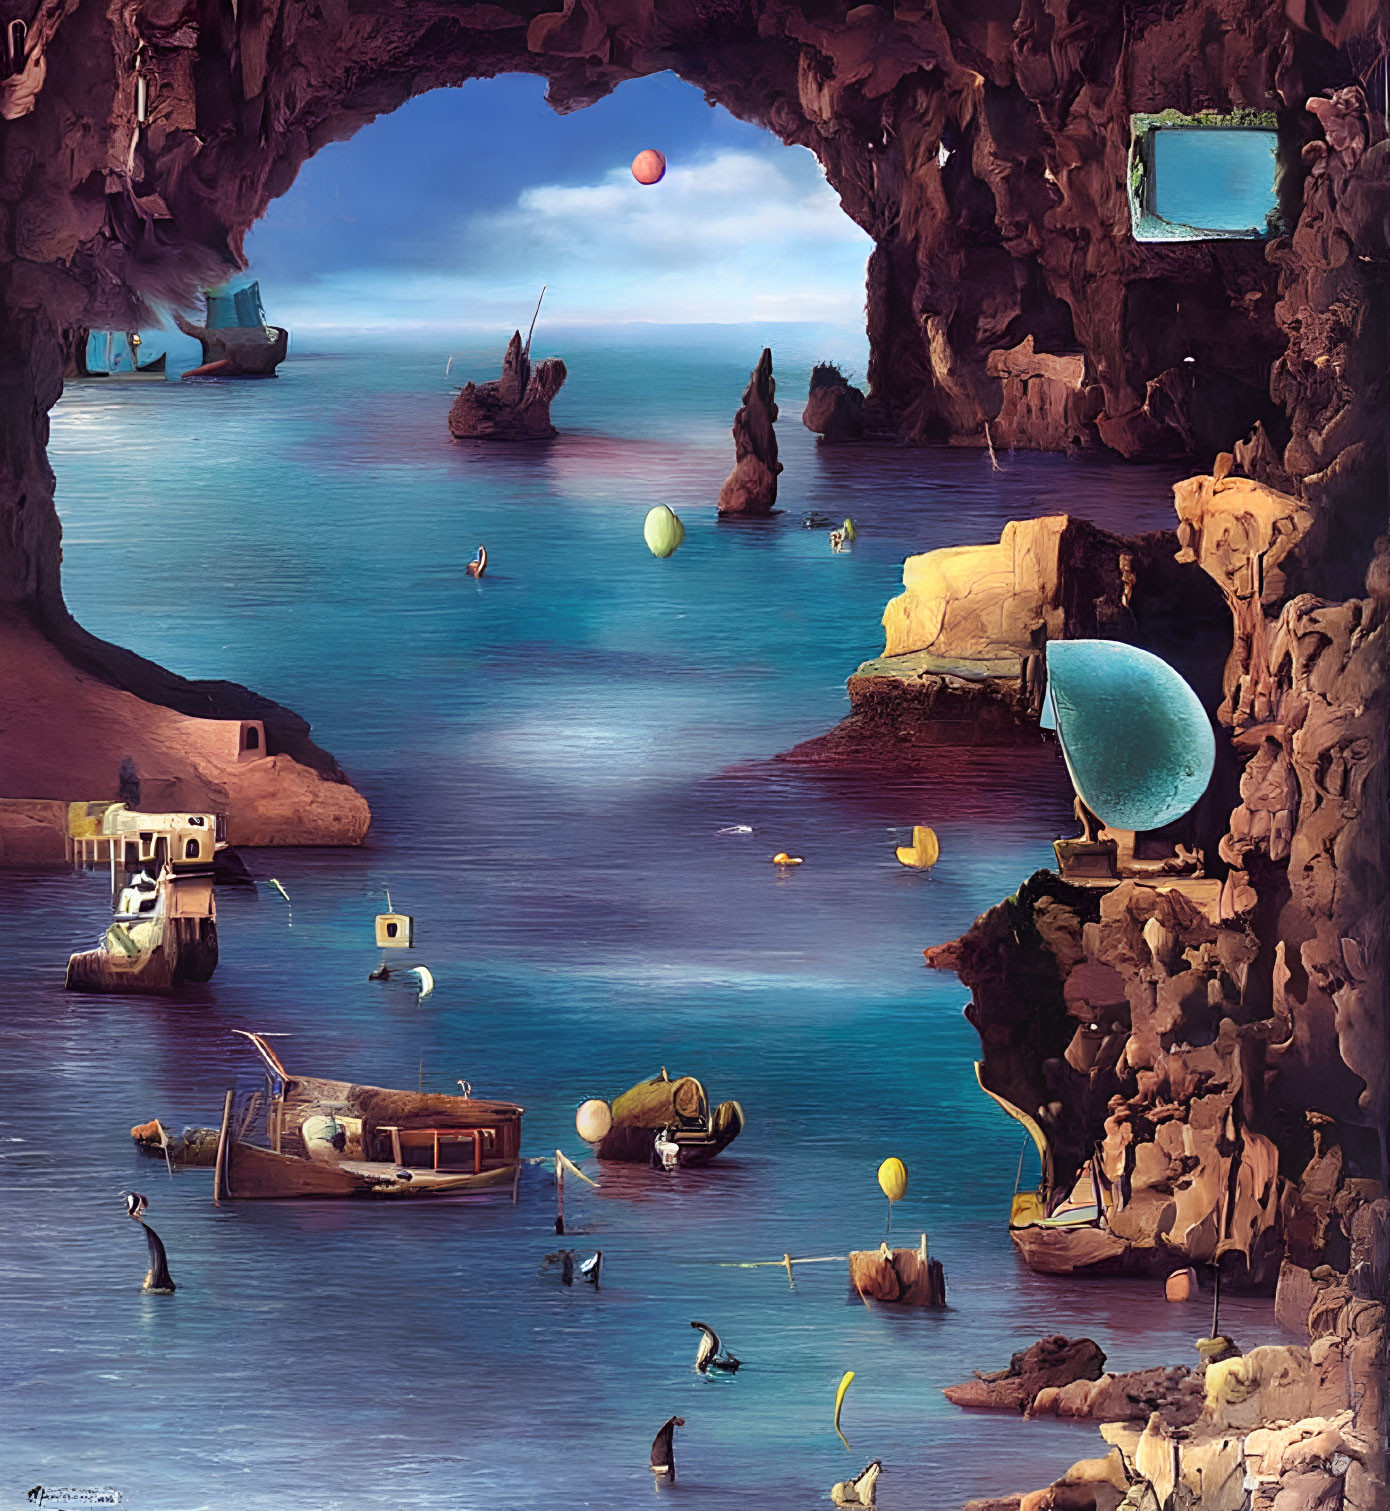 Colorful surrealistic seascape with floating balloons and whimsical ships.